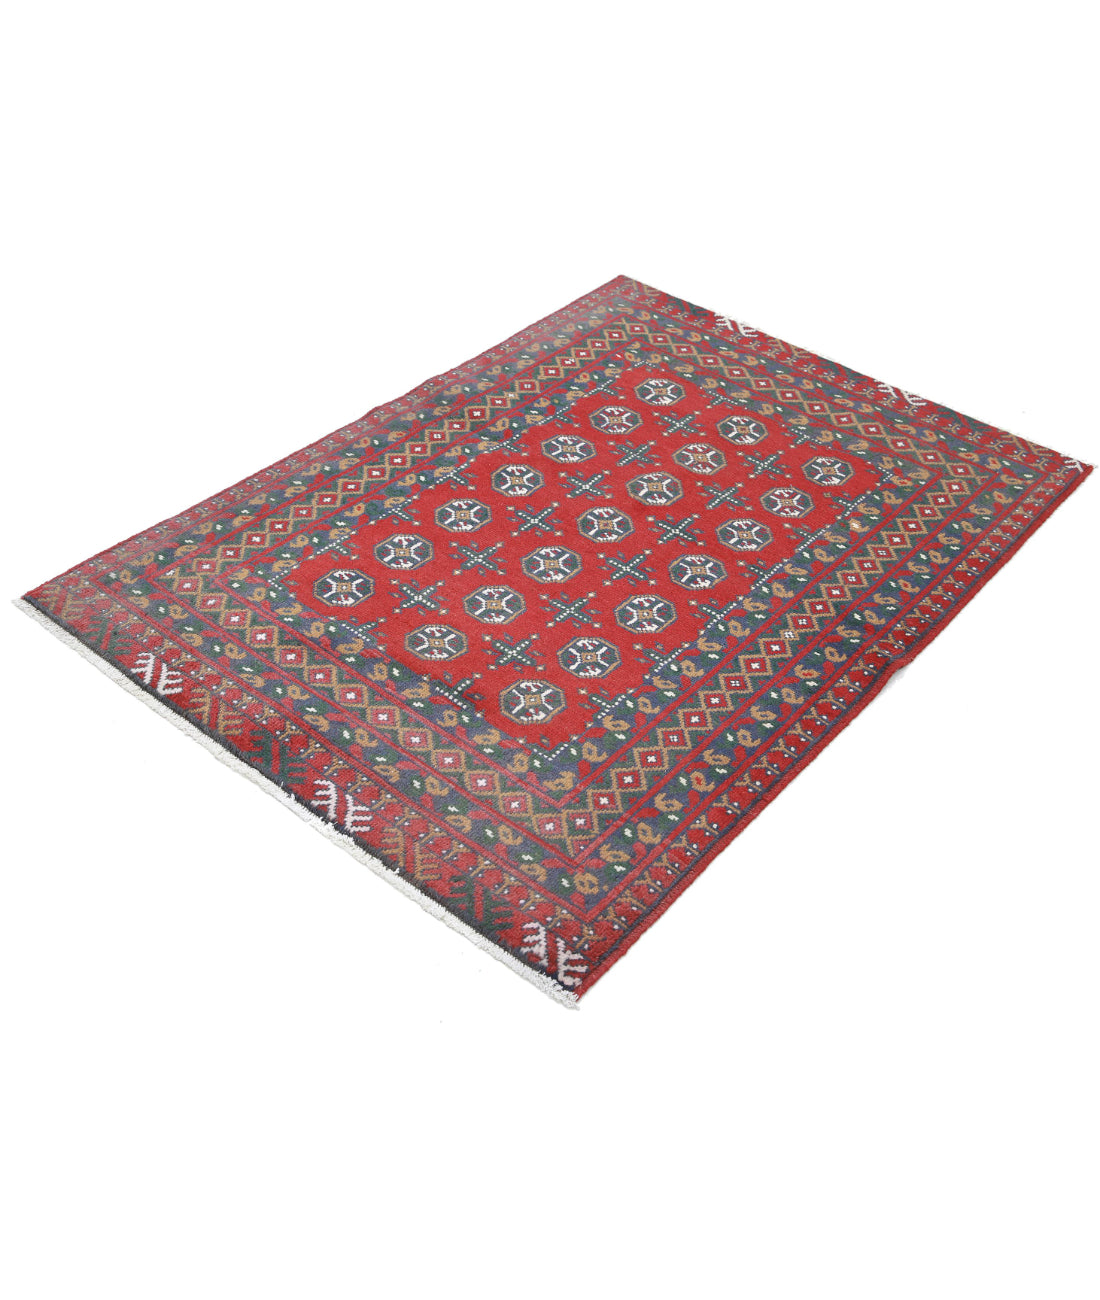 Revival 3'5'' X 4'10'' Hand-Knotted Wool Rug 3'5'' x 4'10'' (103 X 145) / Red / Grey